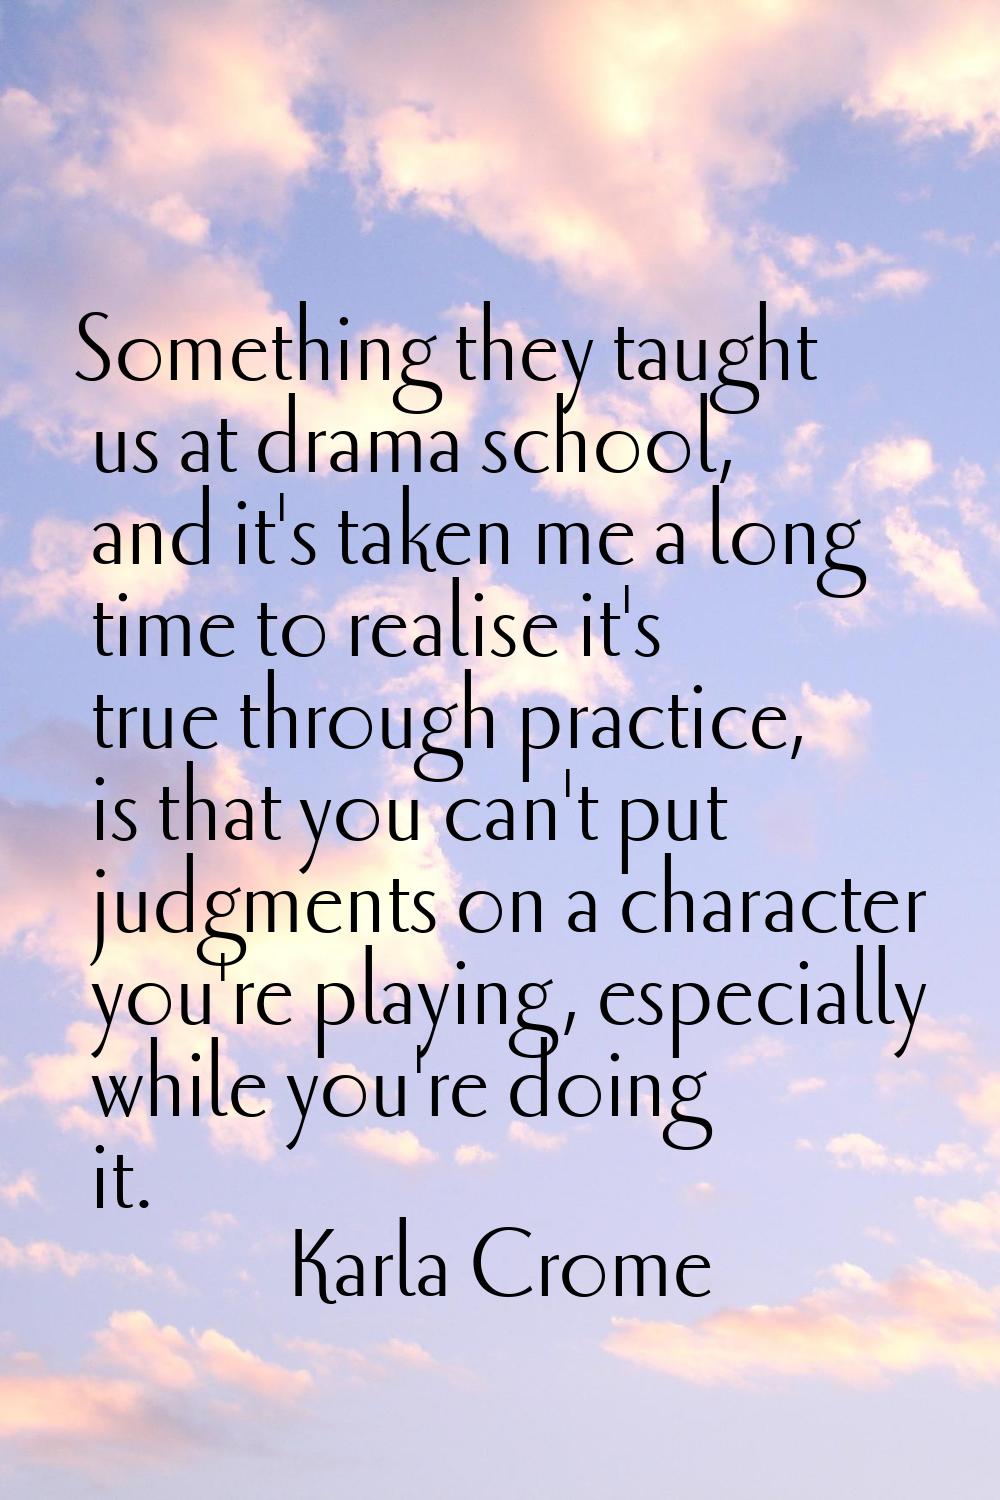 Something they taught us at drama school, and it's taken me a long time to realise it's true throug